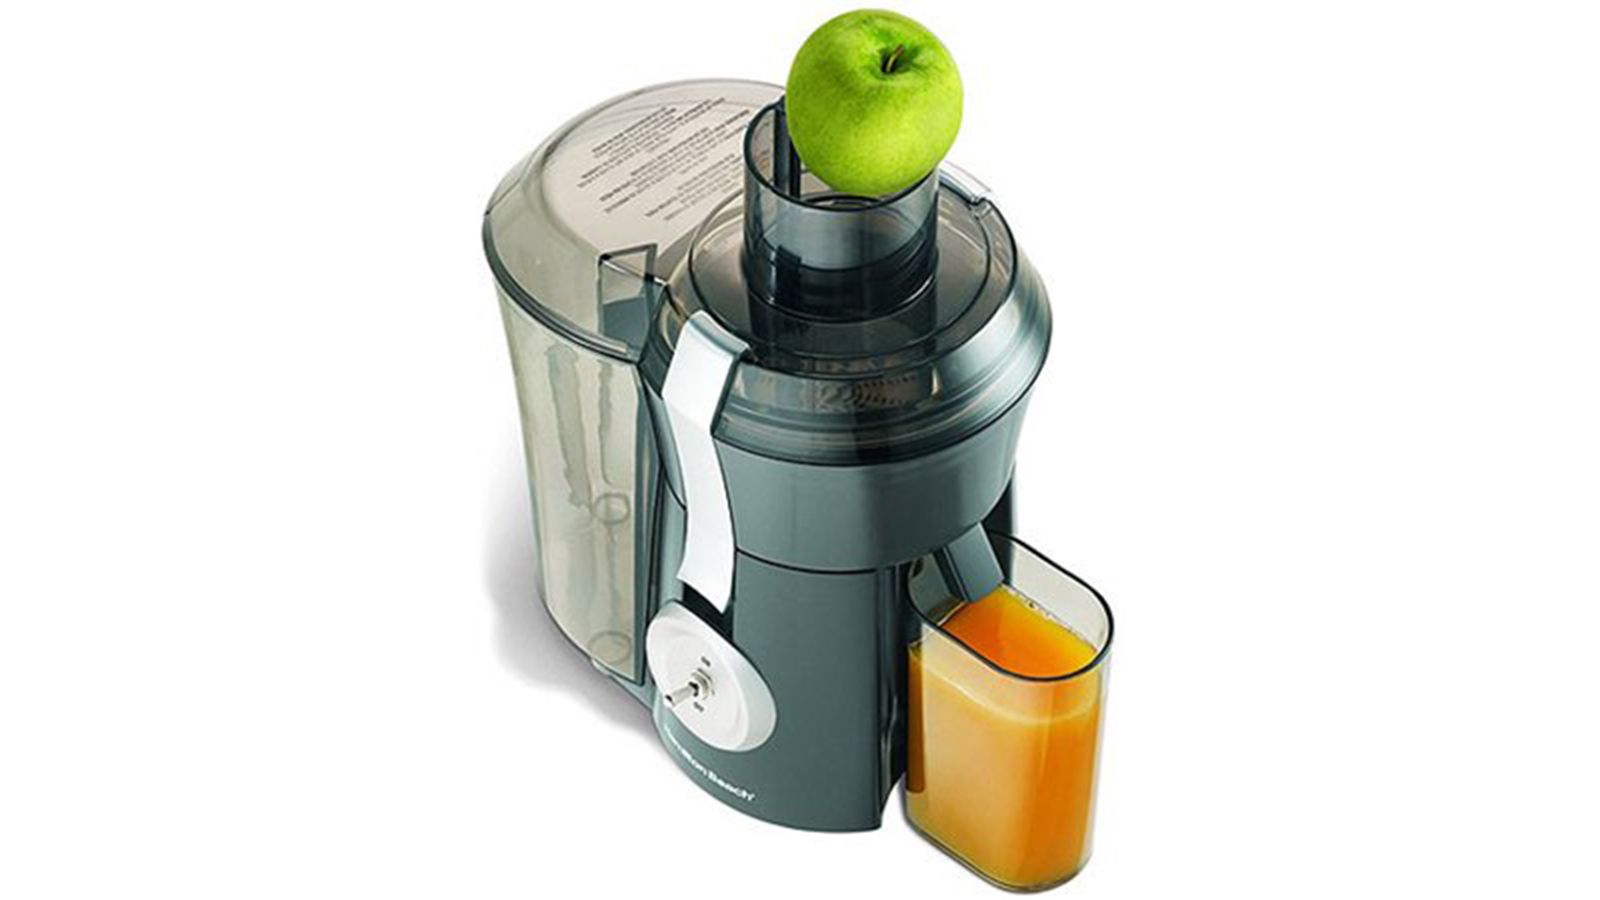 10 Best Kitchen Gadgets for Healthy Eating « Running in a Skirt